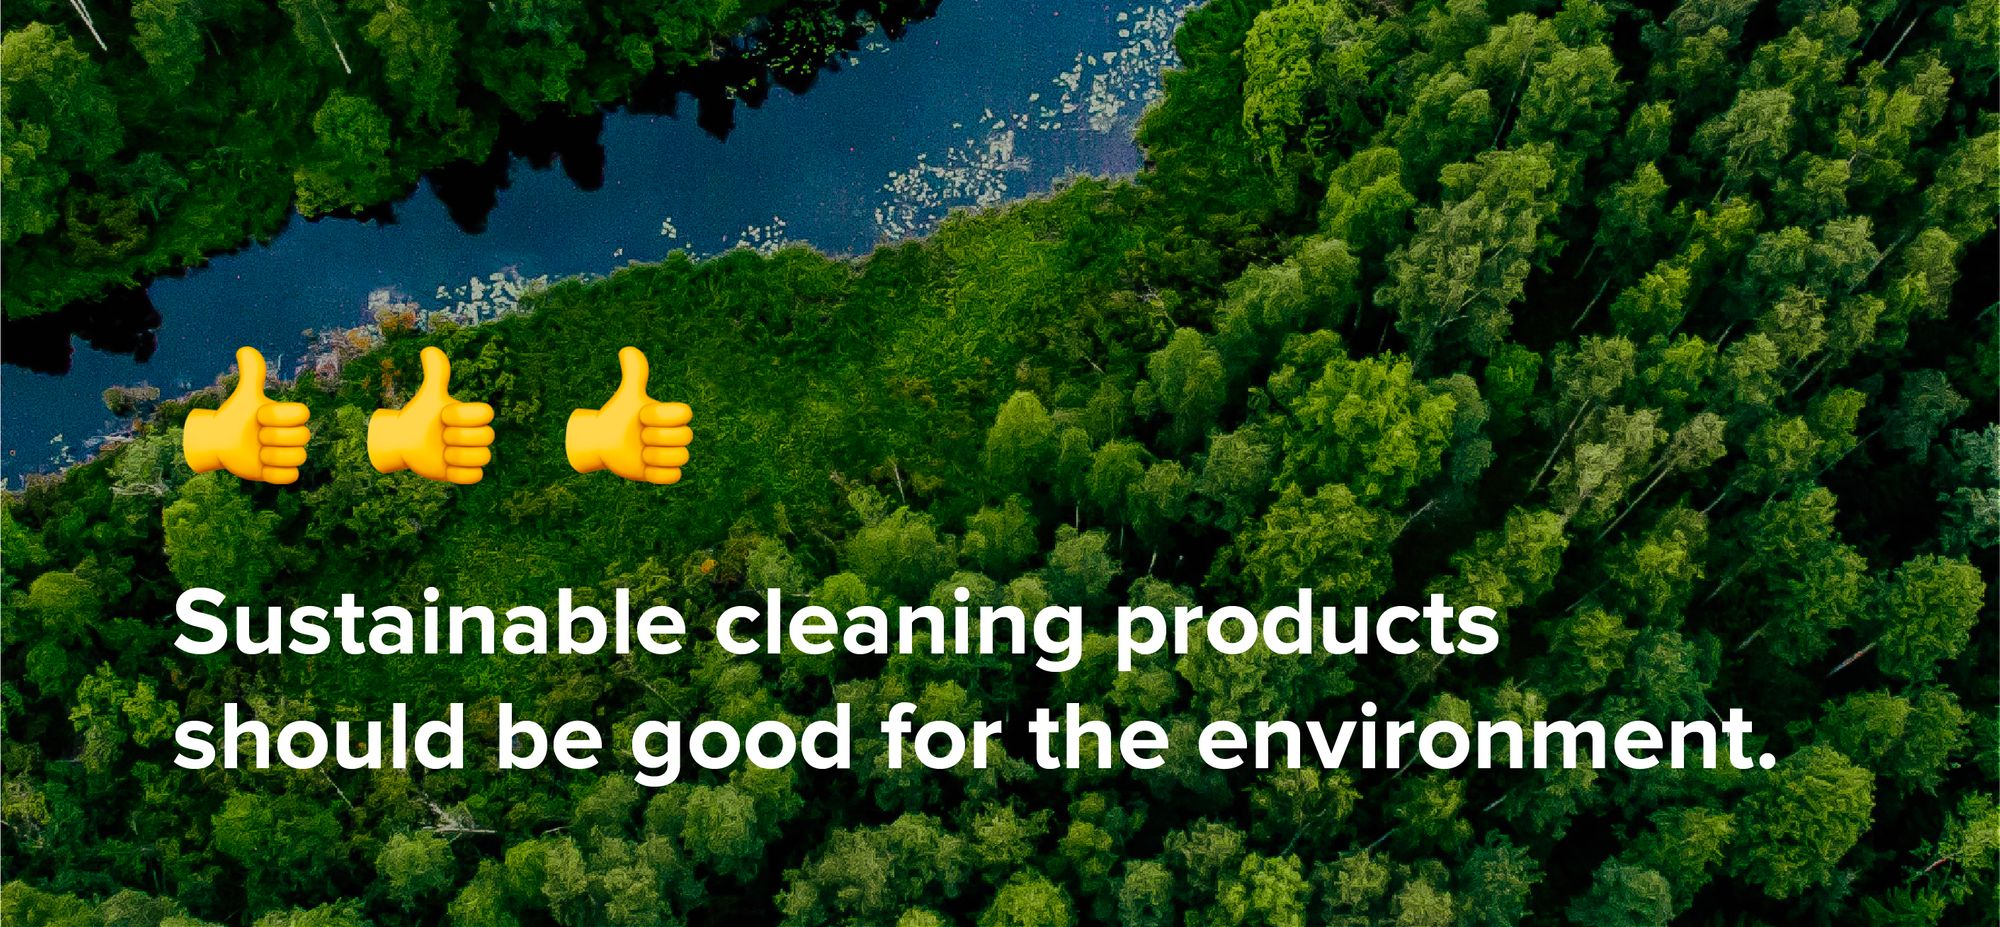 sustainable cleaning products should be good for the environment.